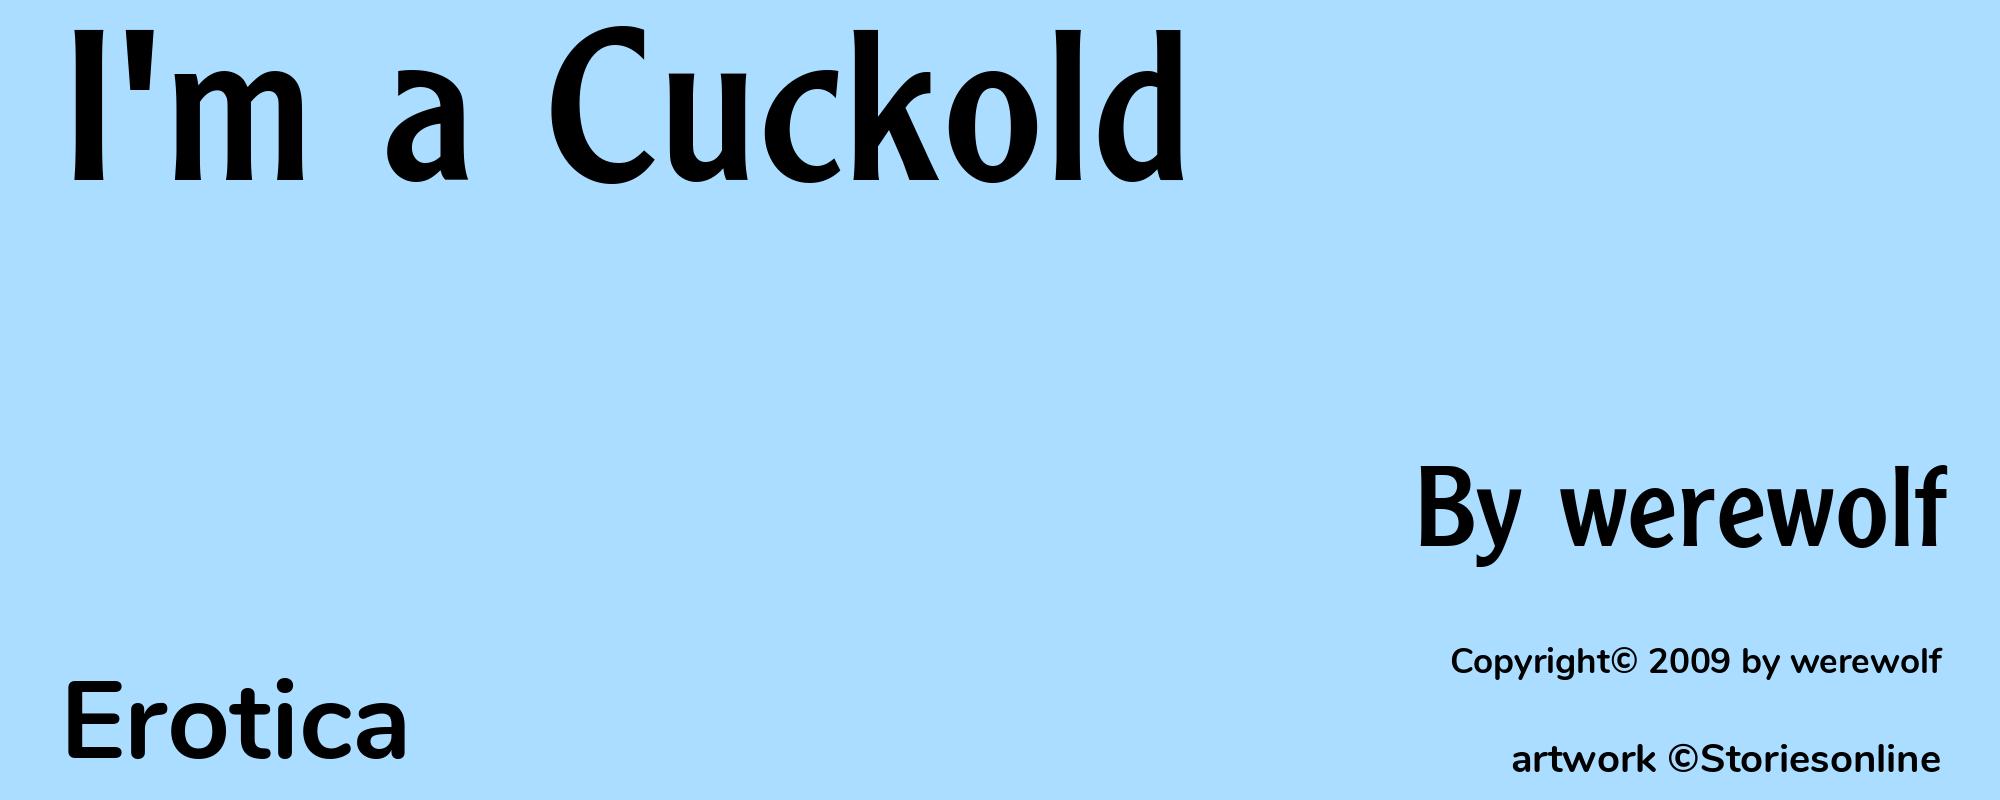 I'm a Cuckold - Cover